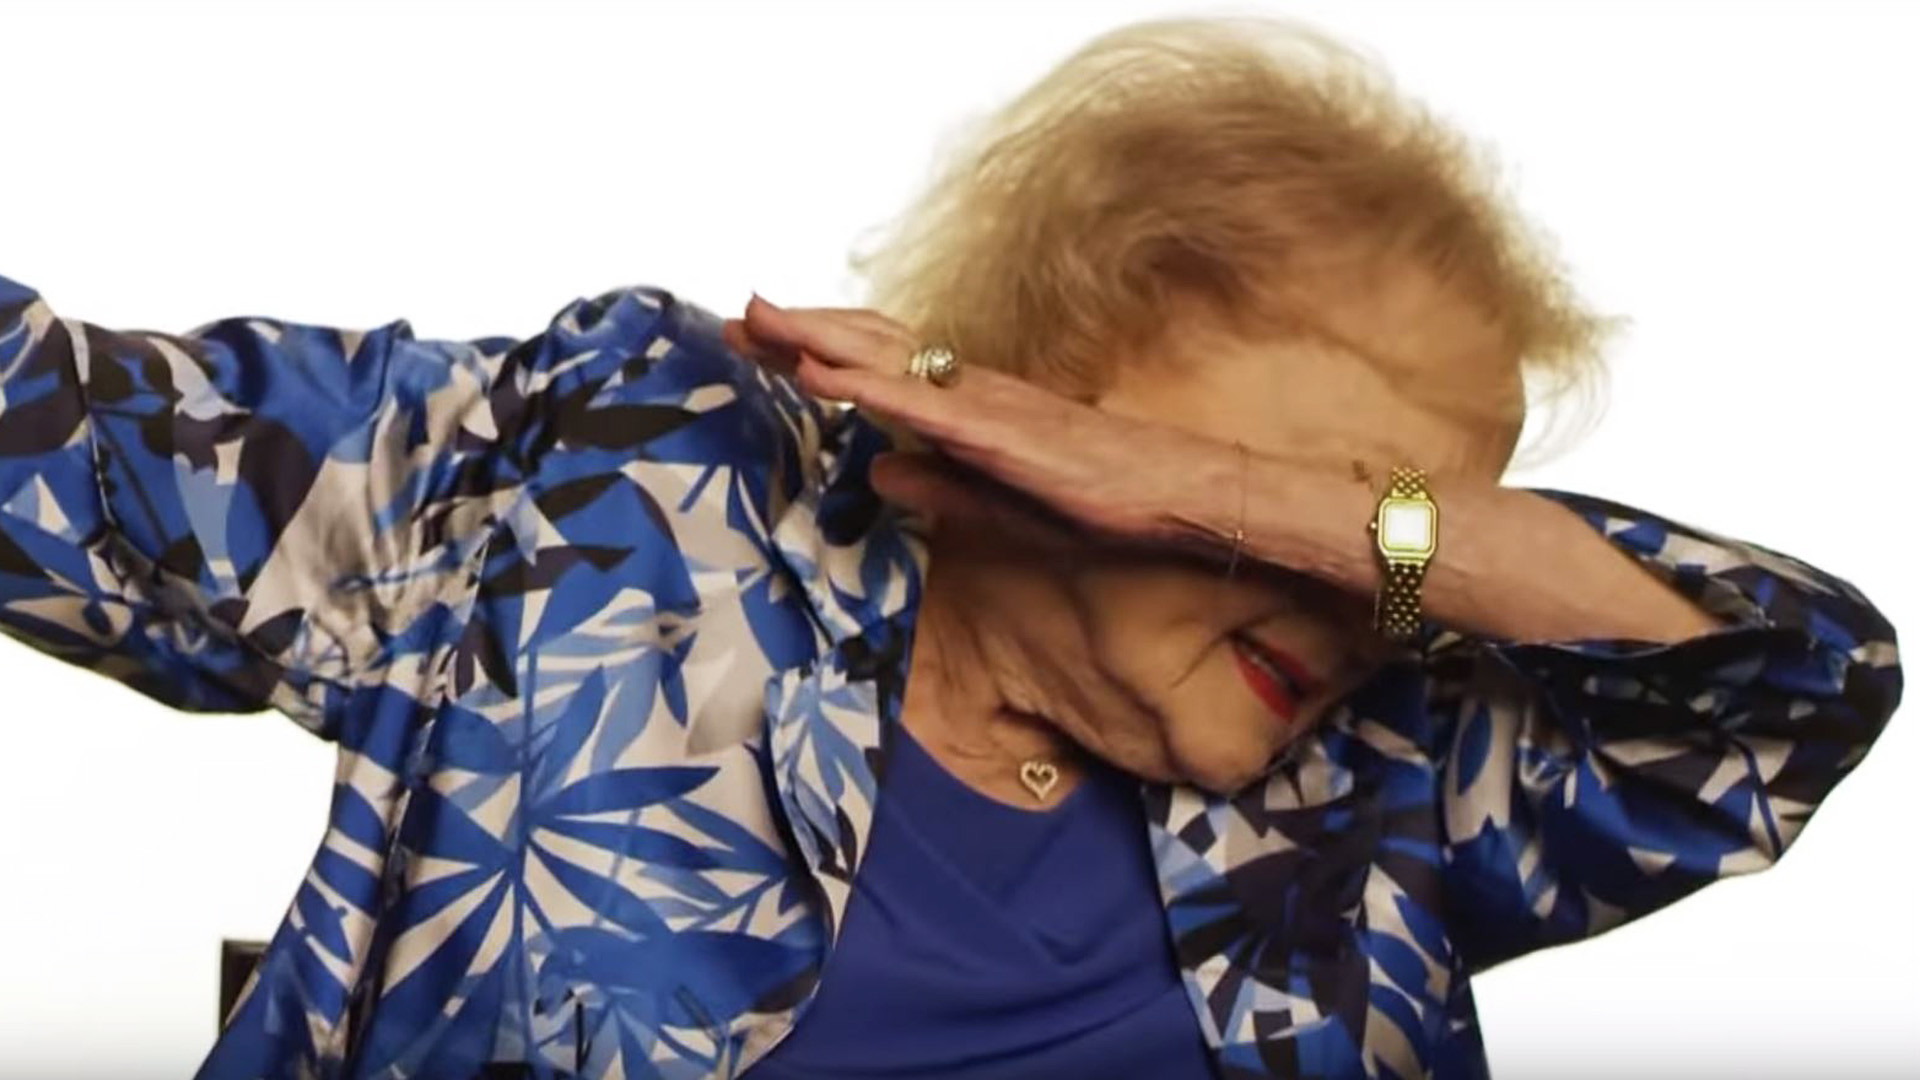 Does Betty White dab better than Cam Newton? Watch for yourself!